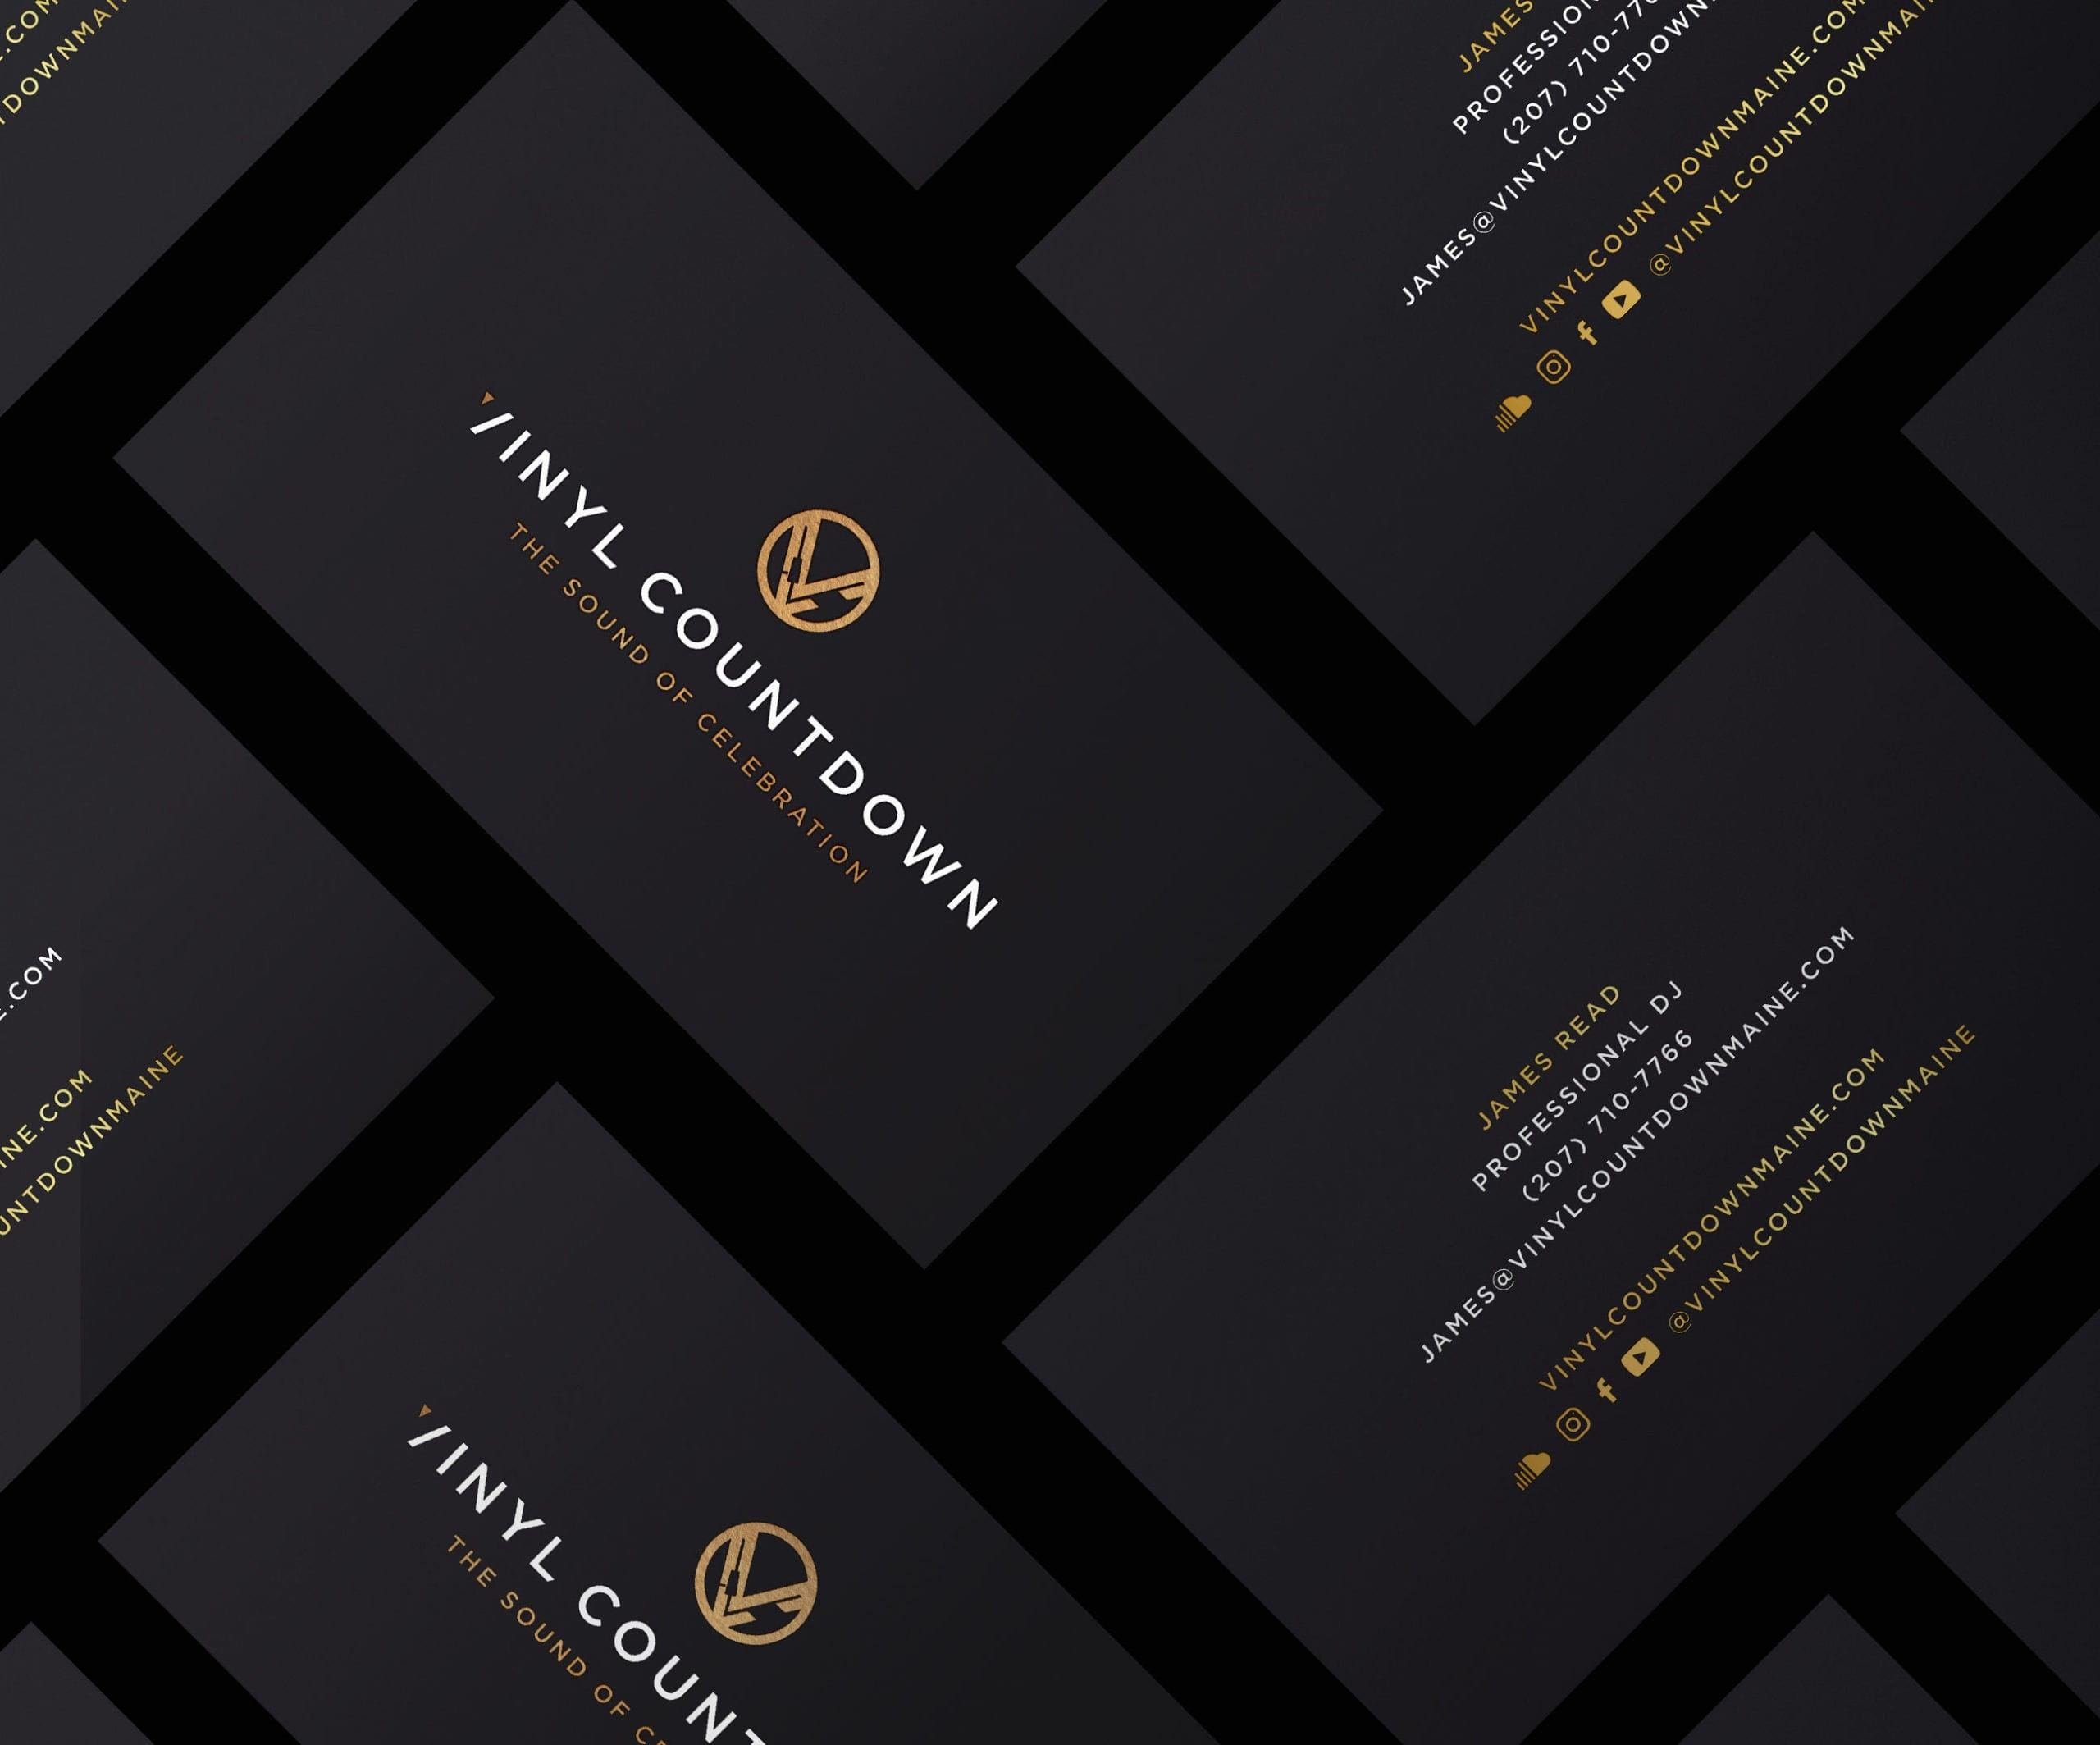 Business Cards on Black Background